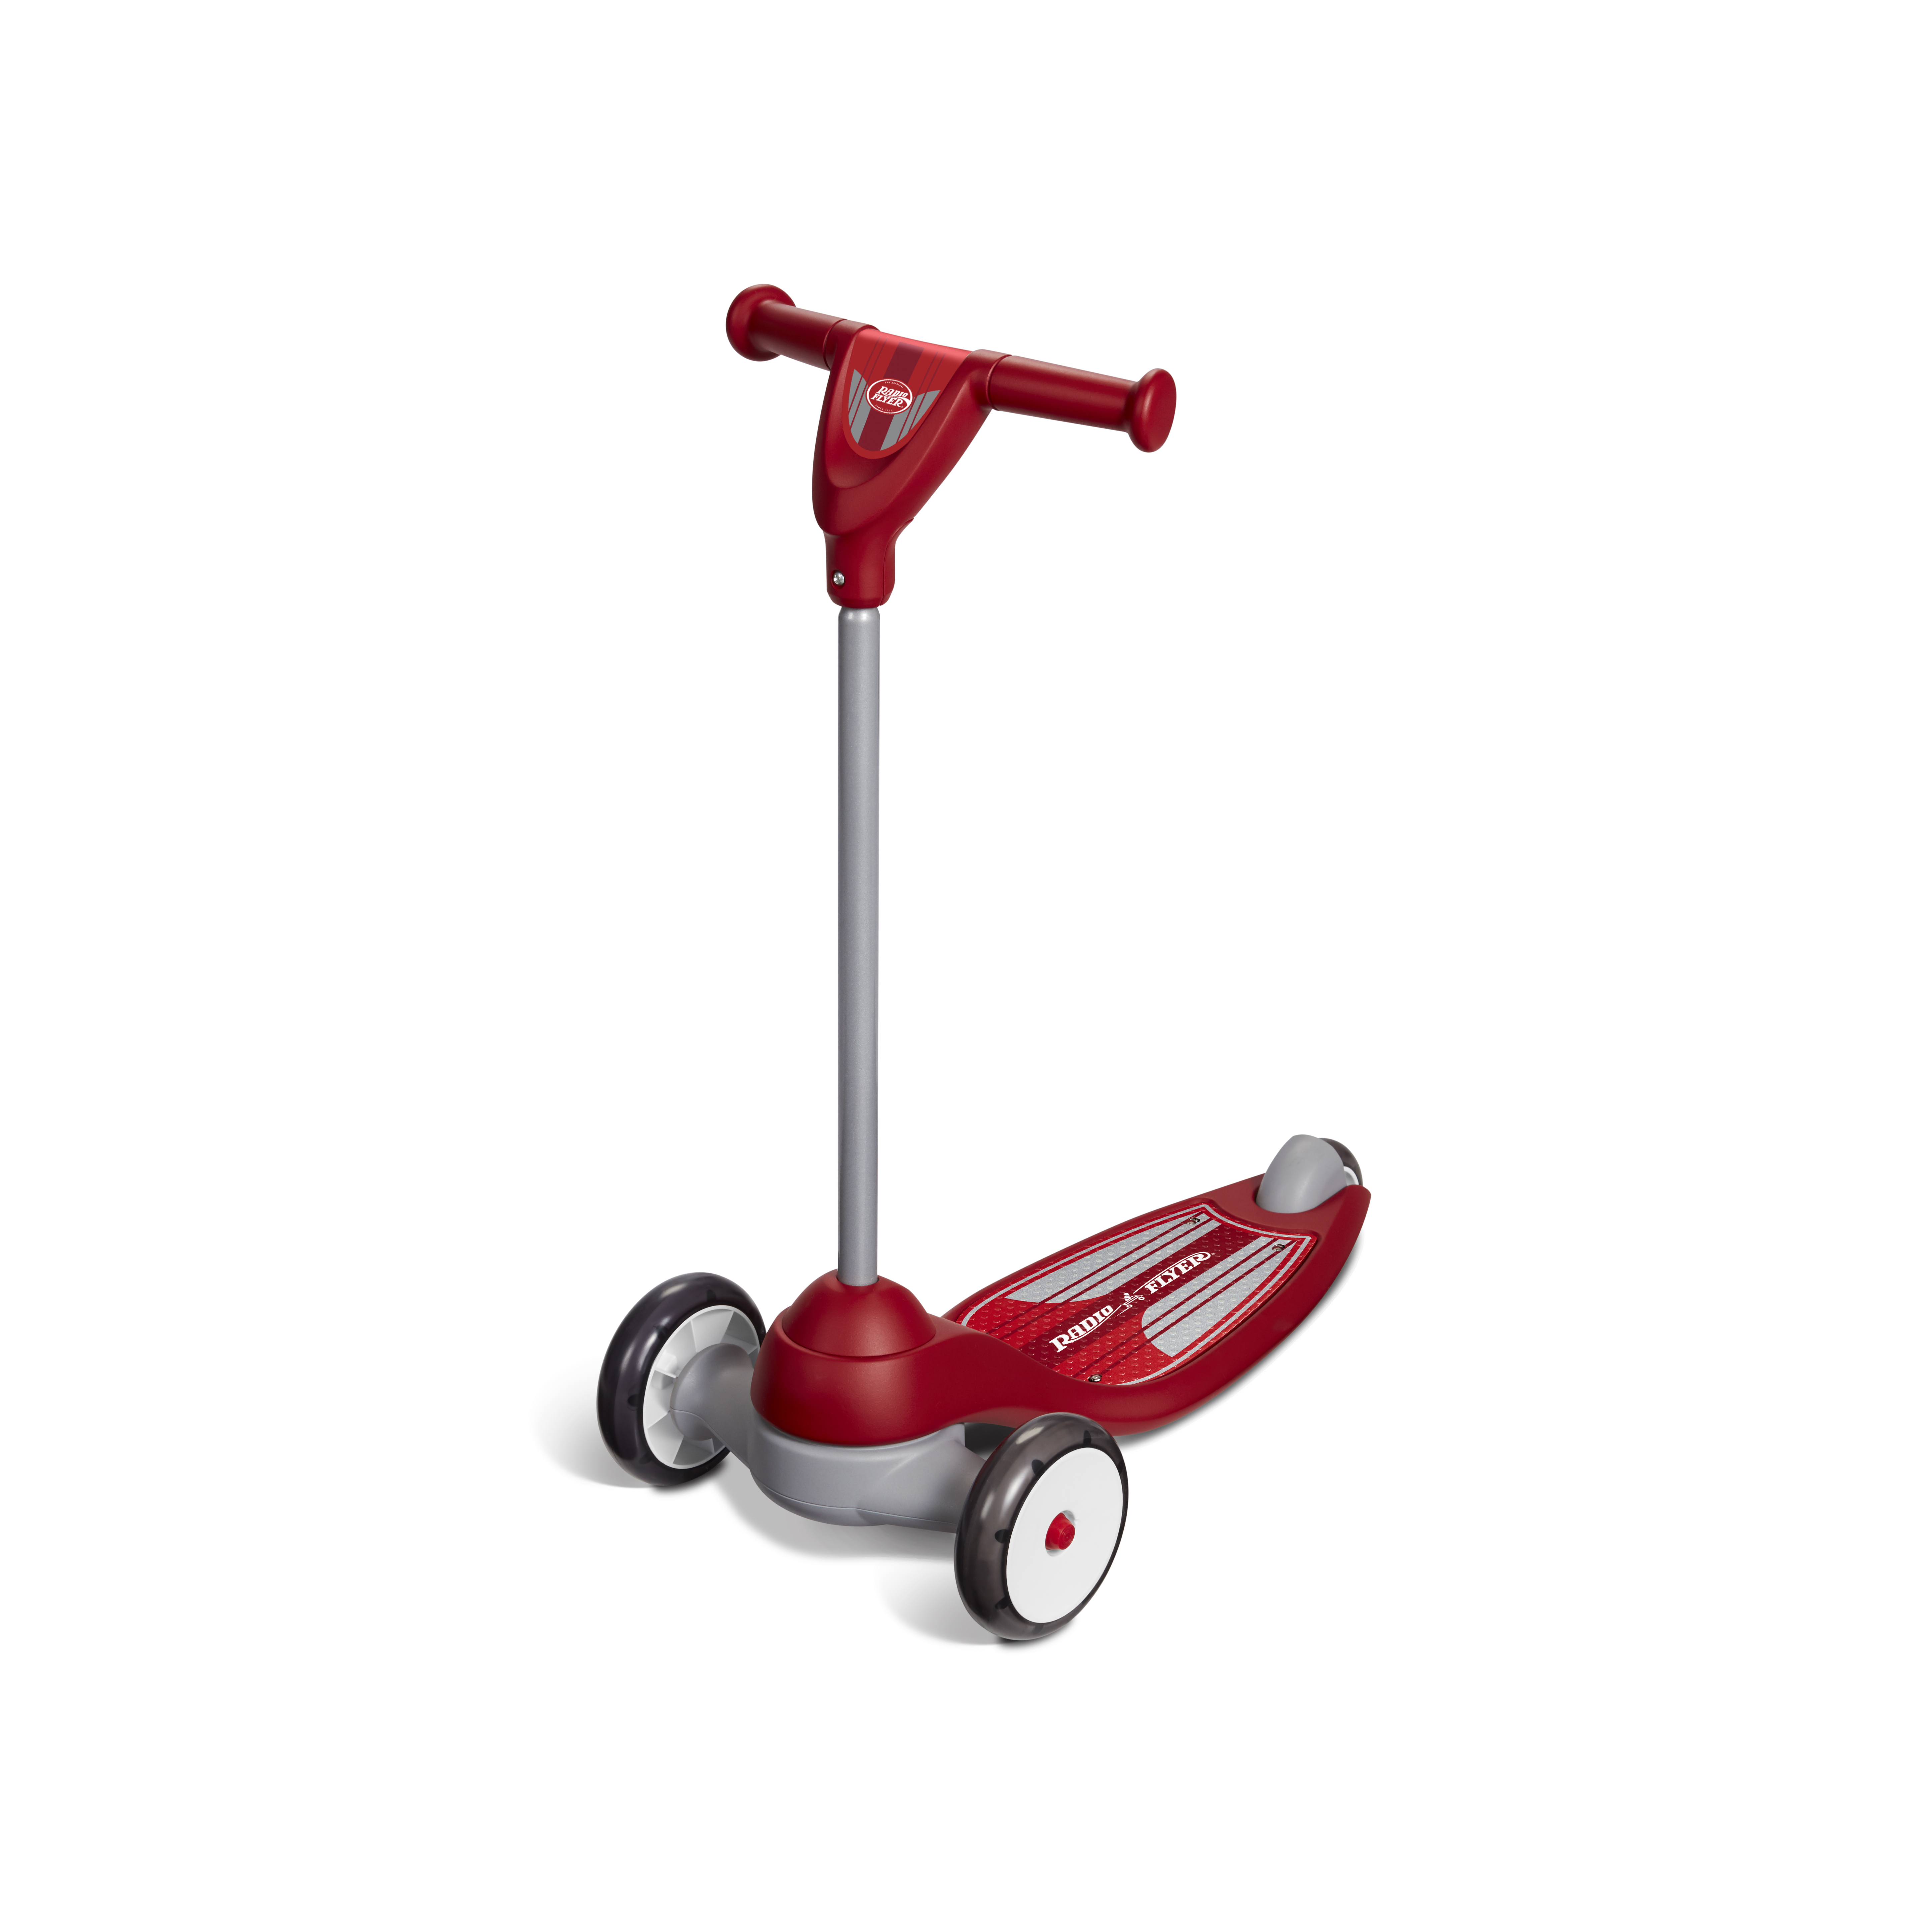 Radio Flyer, My 1st Scooter Sport, Three Wheel Scooter, Red - image 7 of 7